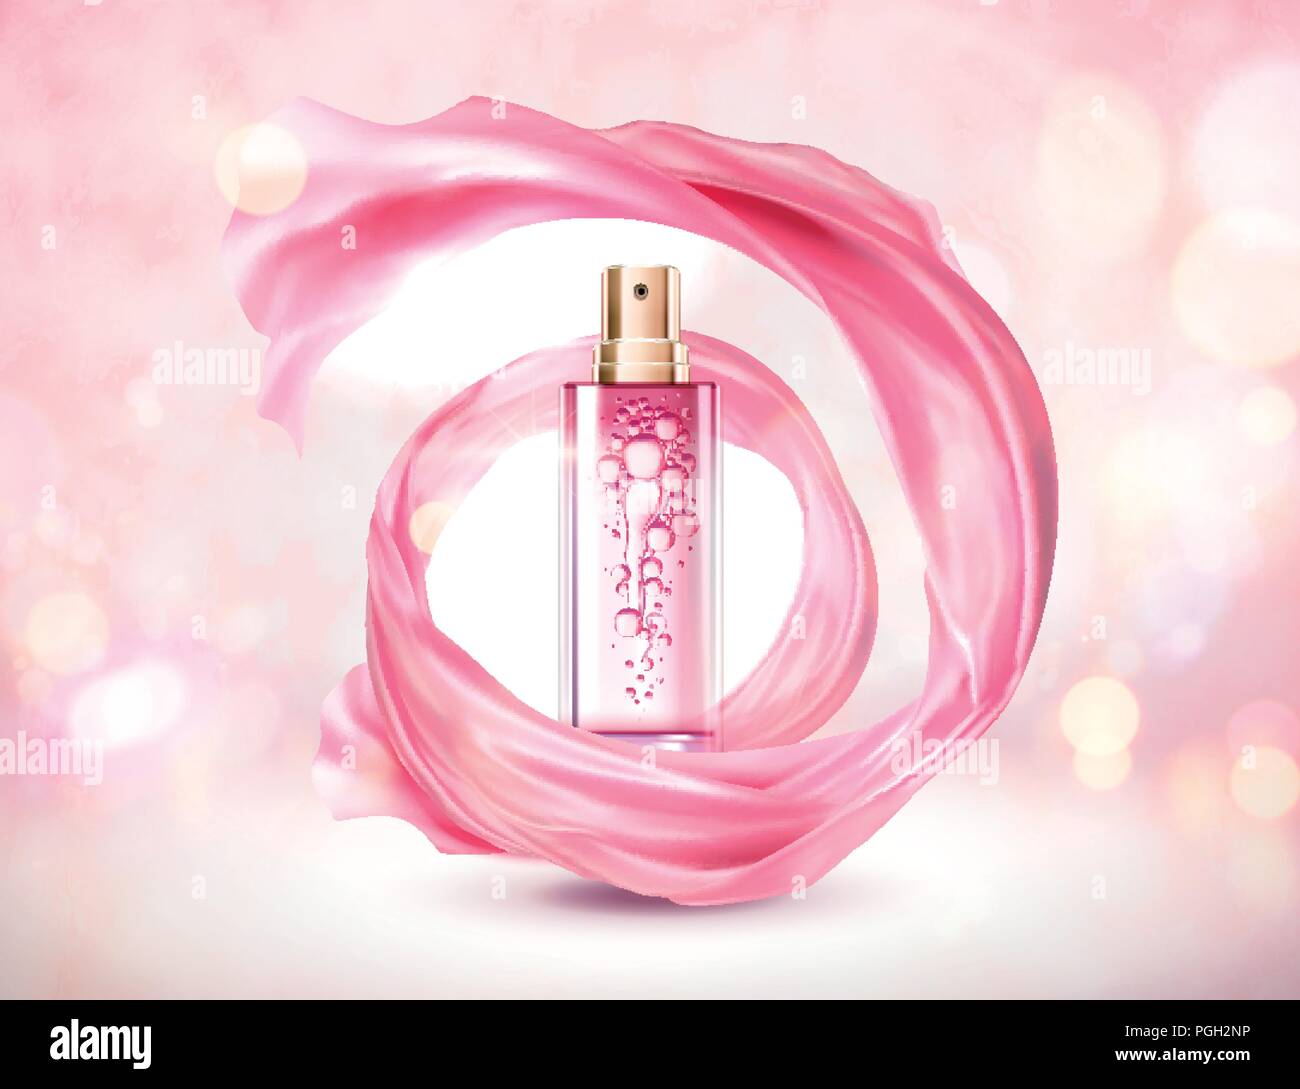 Cosmetic pink spray bottle with swirling chiffon on sparkling background Stock Vector